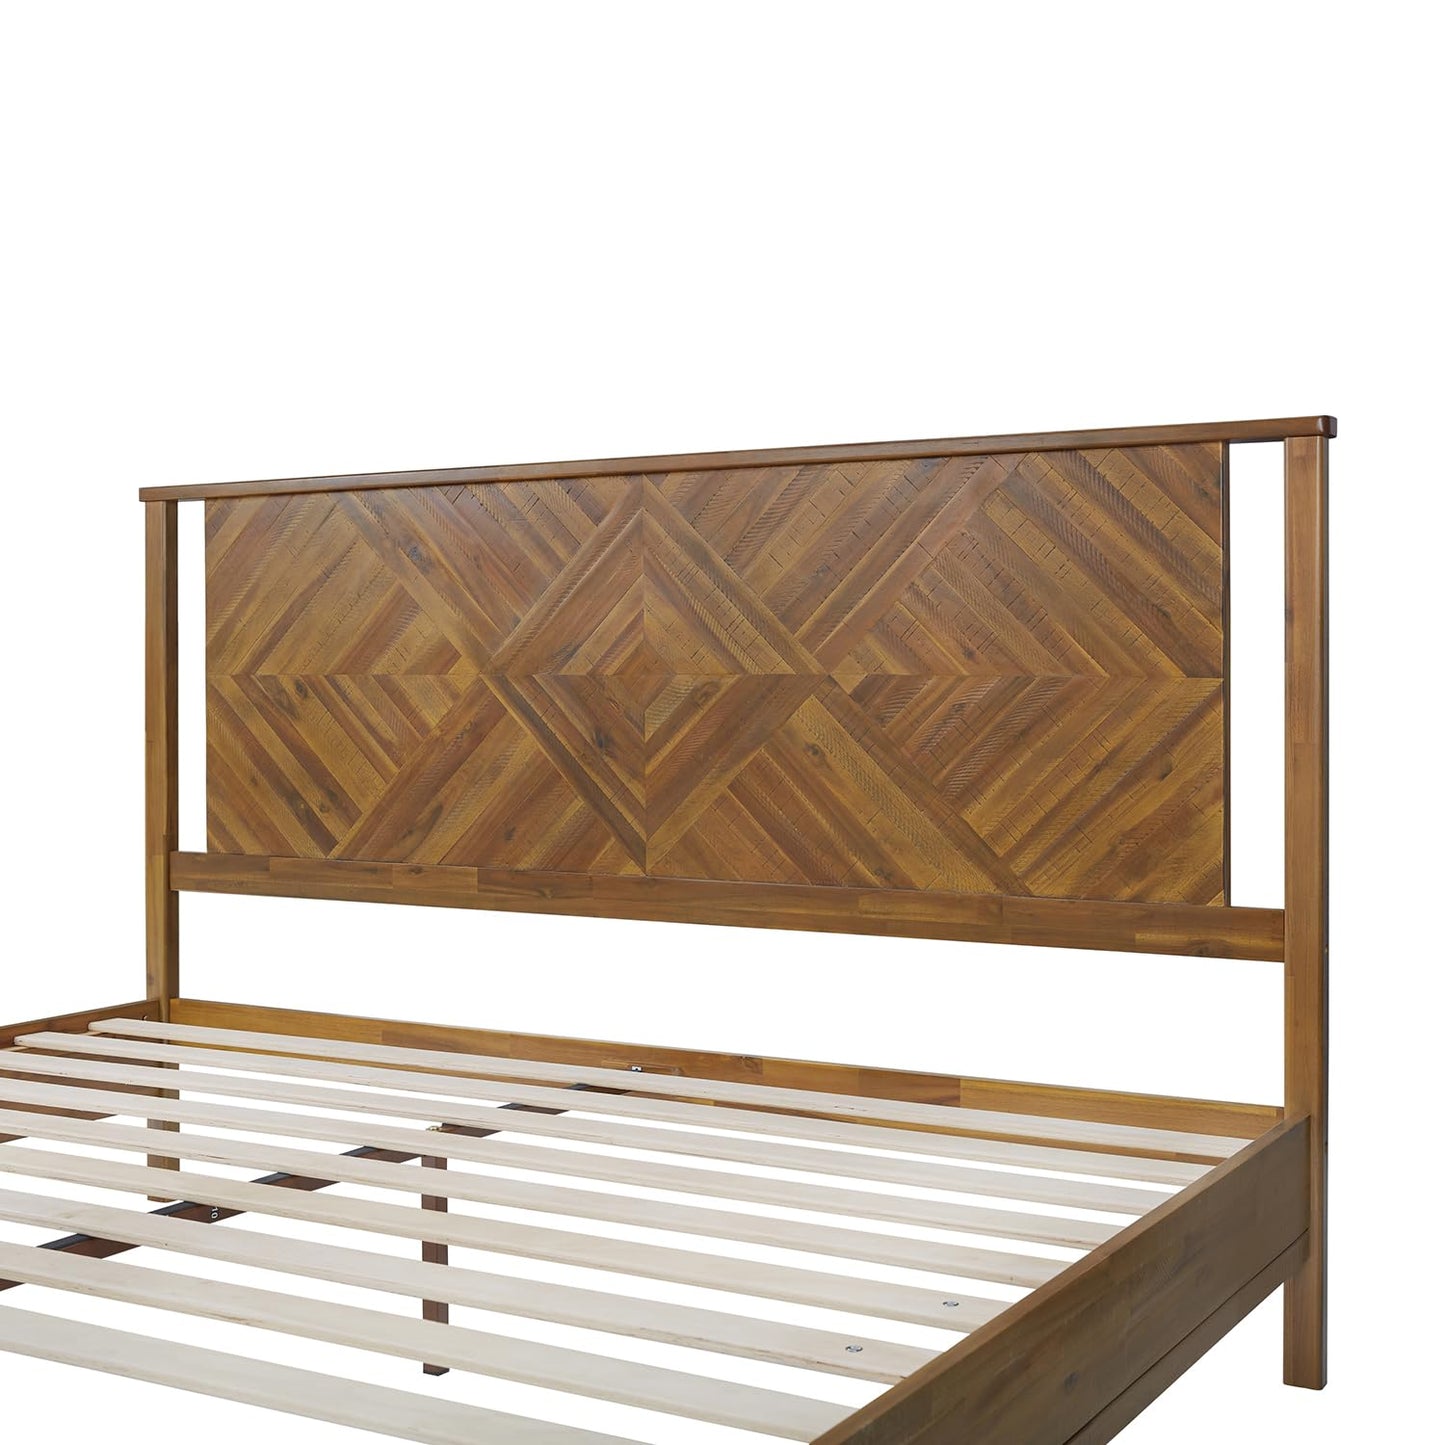 Bme Ethan King Platform Bed Frame with Headboard - Mid Century & Modern Rustic Style - Solid Acacia Wood - No Box Spring Needed - 12 Strong Wood Slat